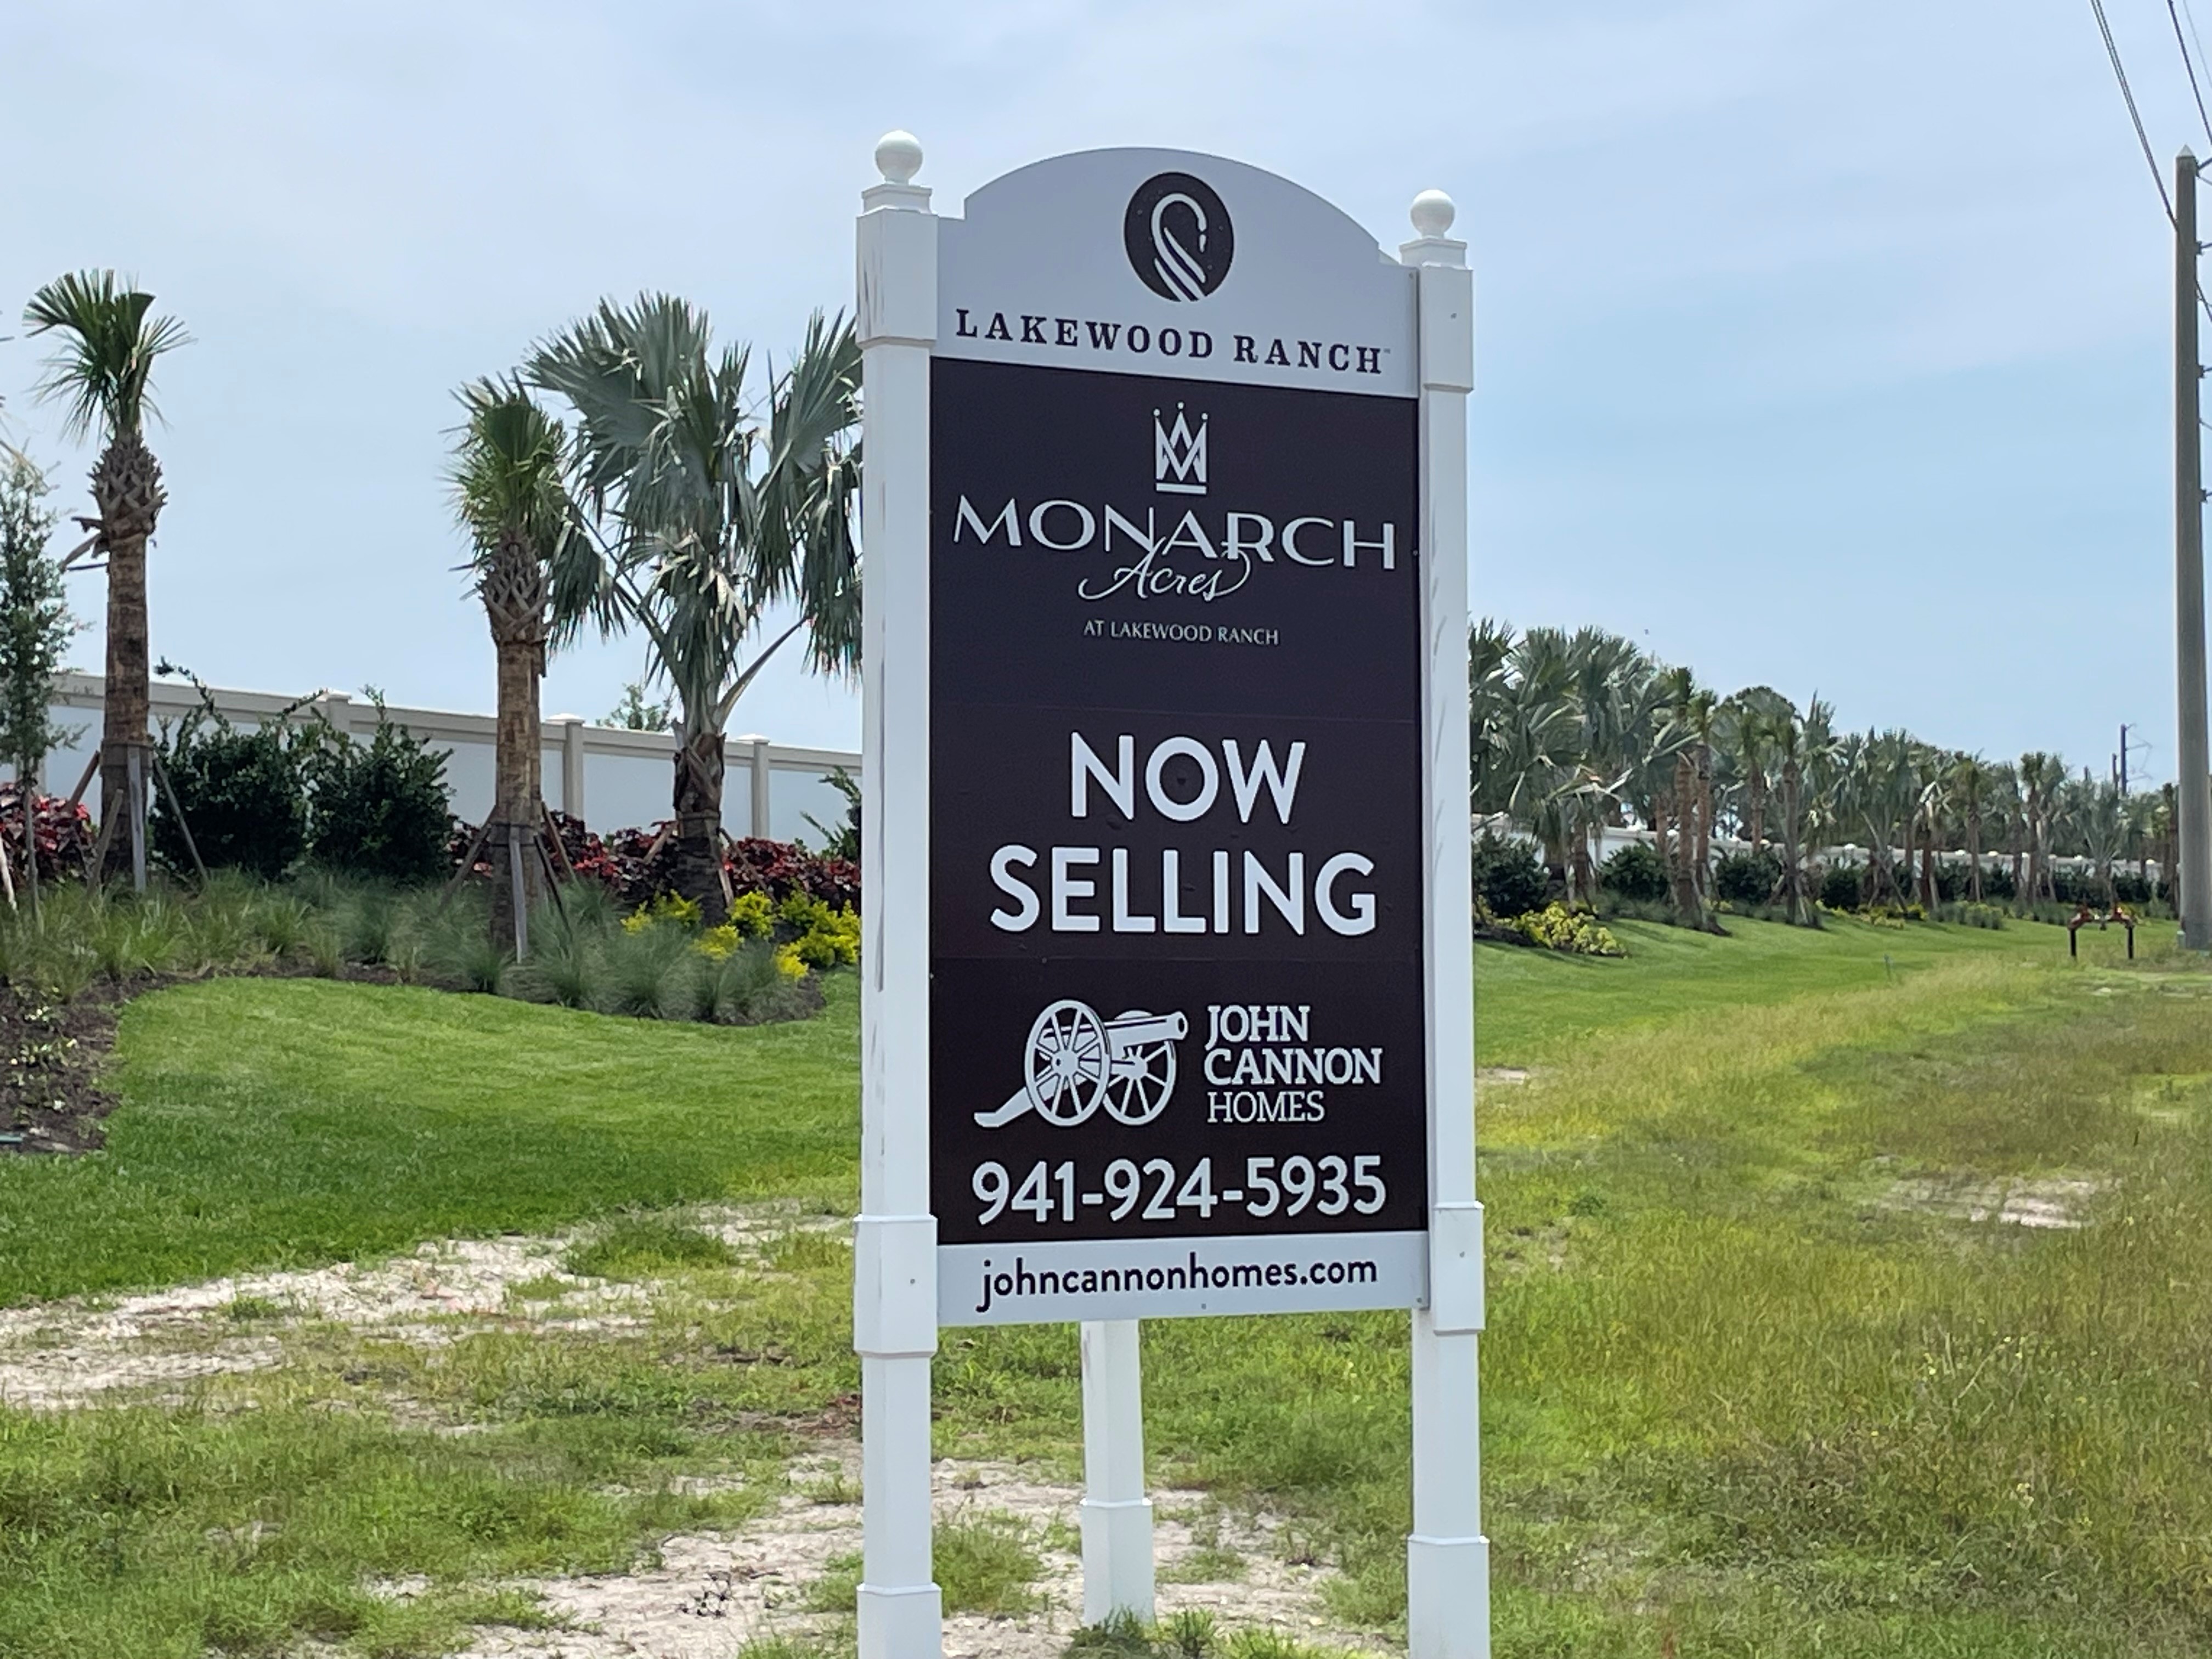 Monarch Acres in Lakewood Ranch